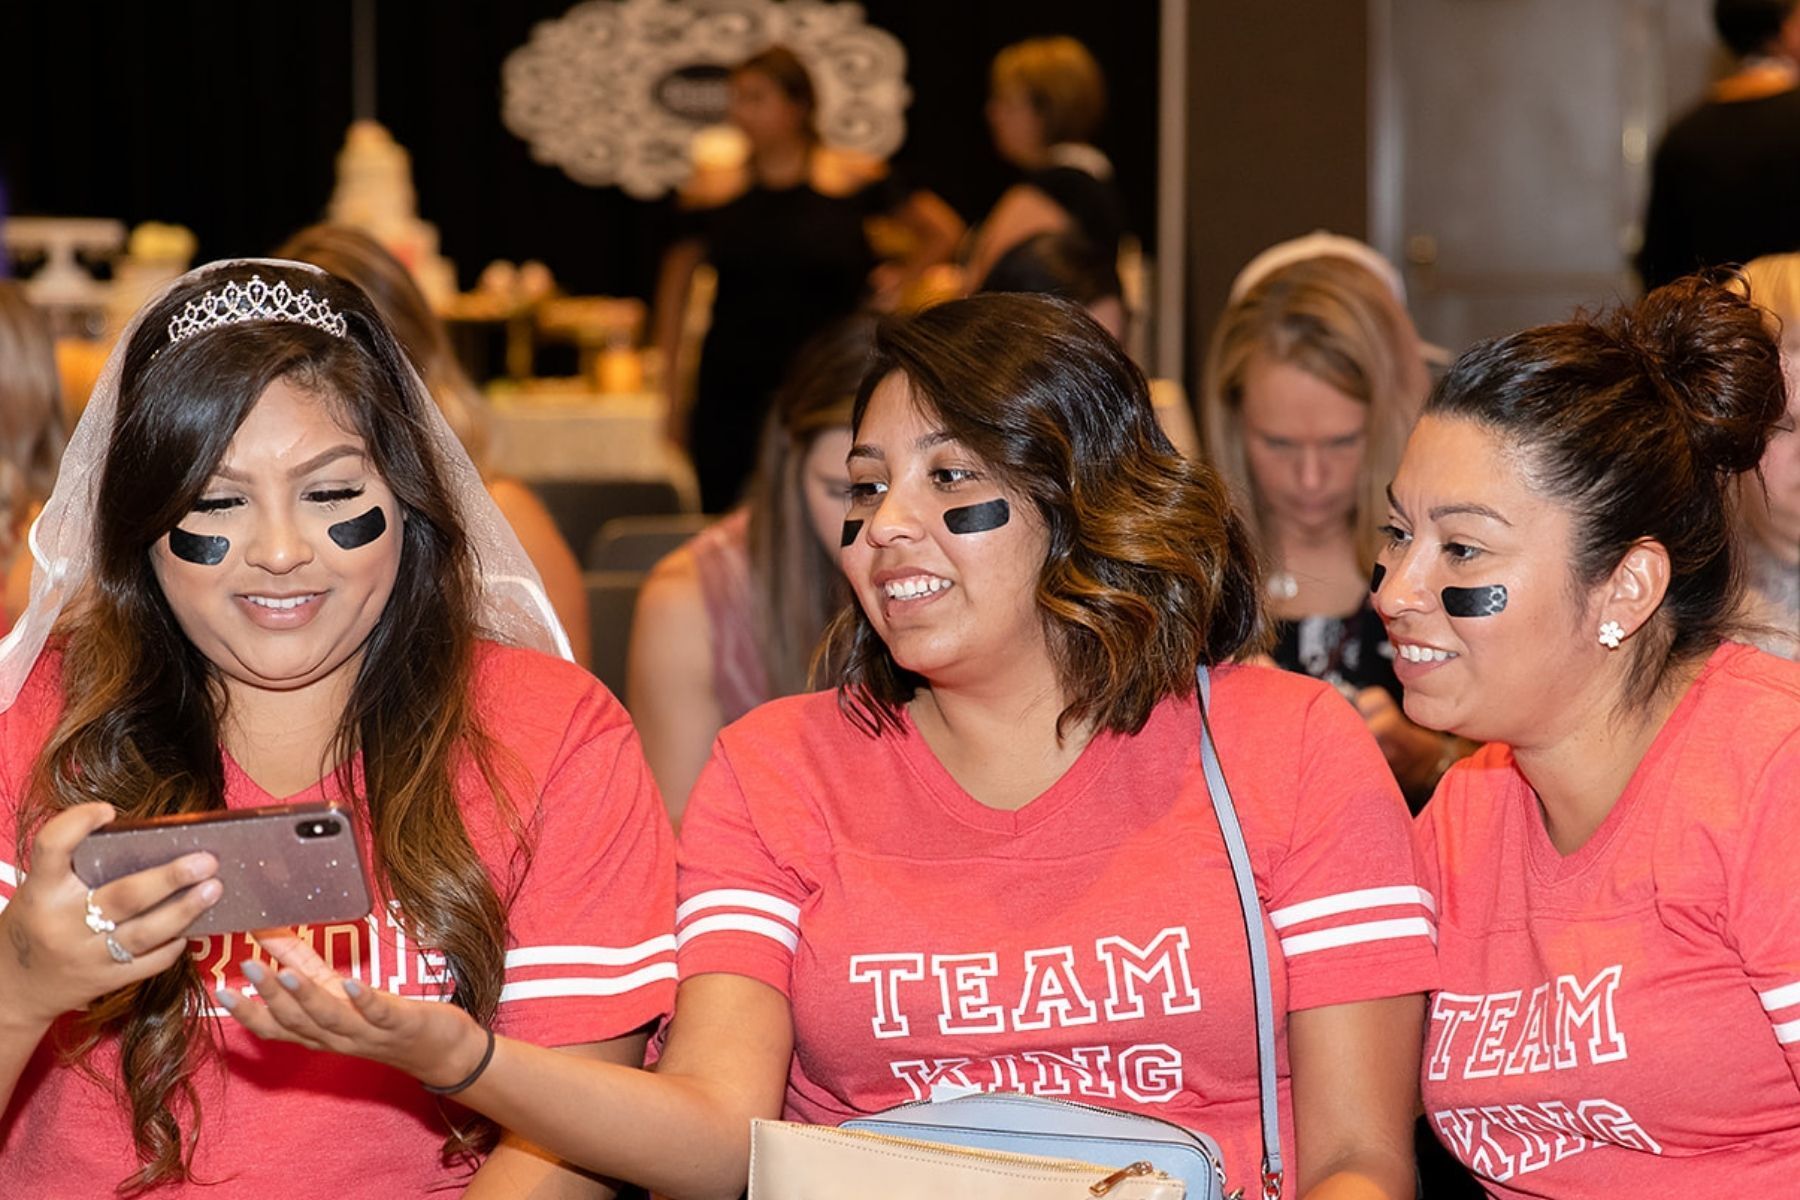 Brides dressed up in team swag to Win prizes at the wedding fair in Fresno, Calfiornia